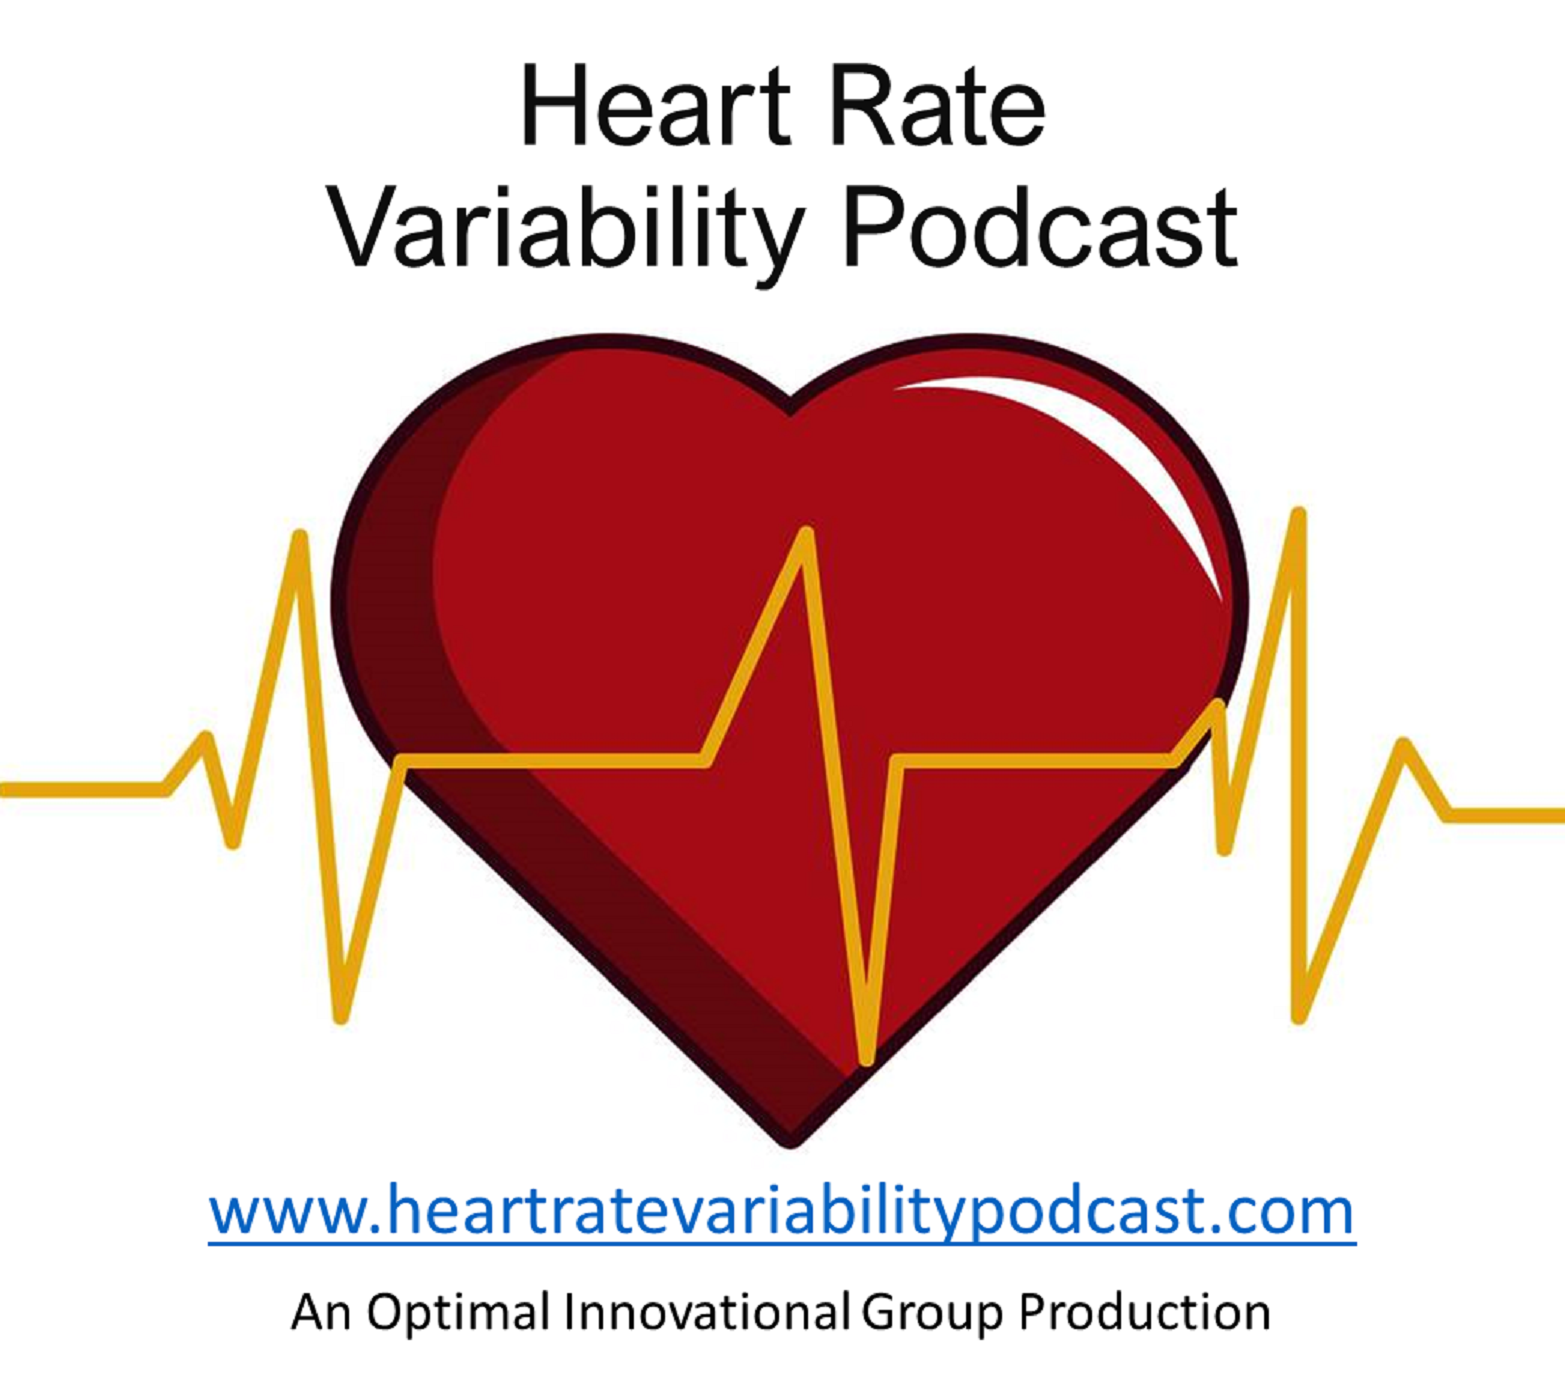 Dr. Janell Mensinger joins the show to discuss her HRV research